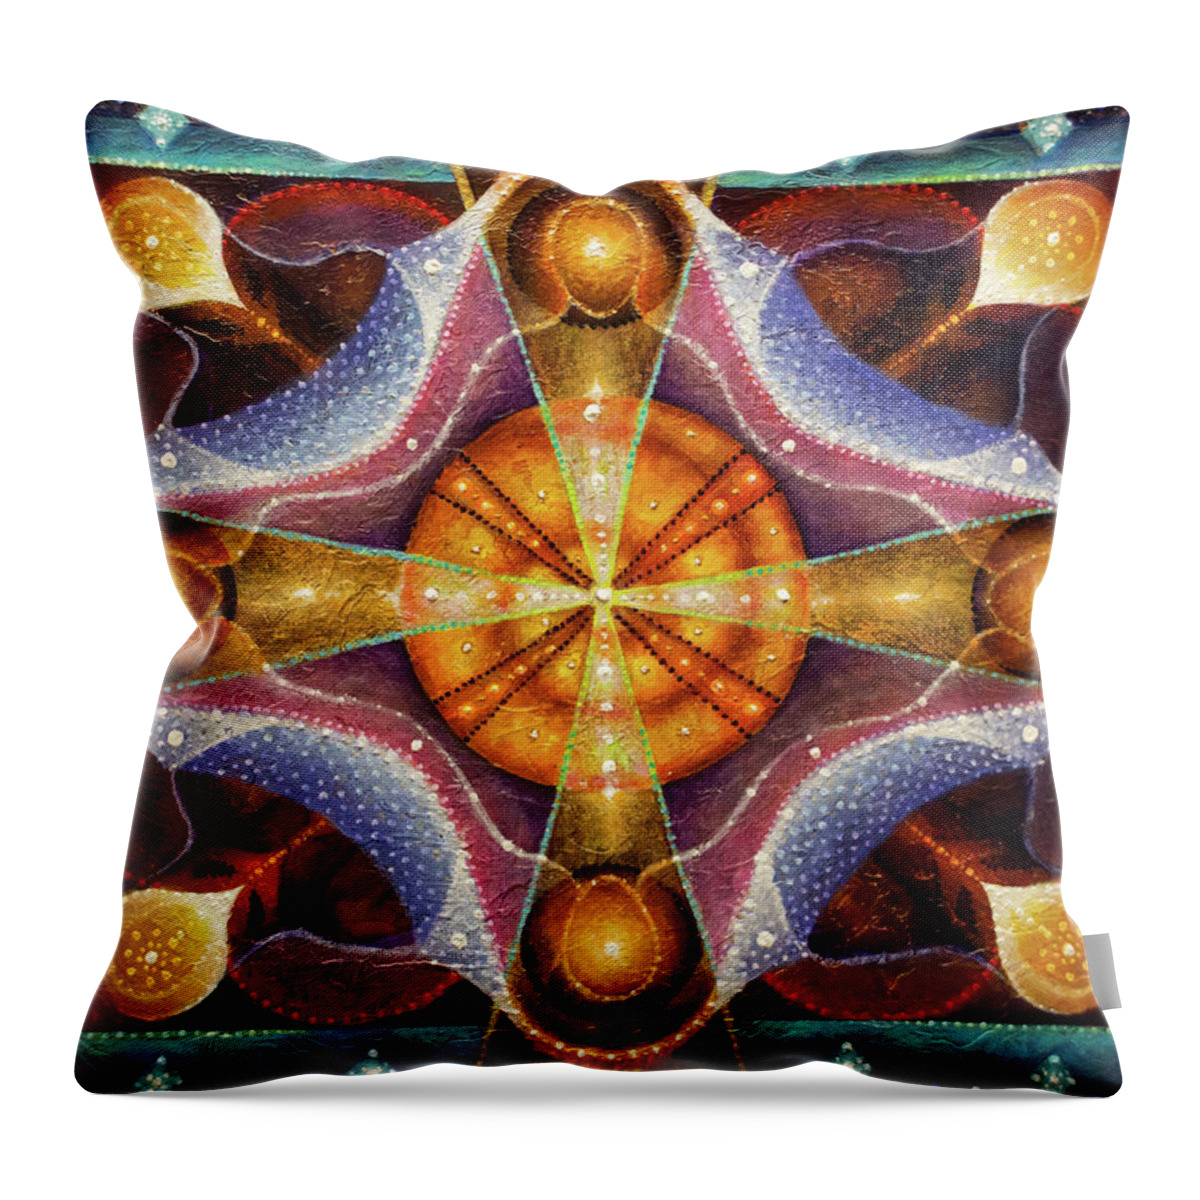 Stars Throw Pillow featuring the painting Star Council by Kevin Chasing Wolf Hutchins